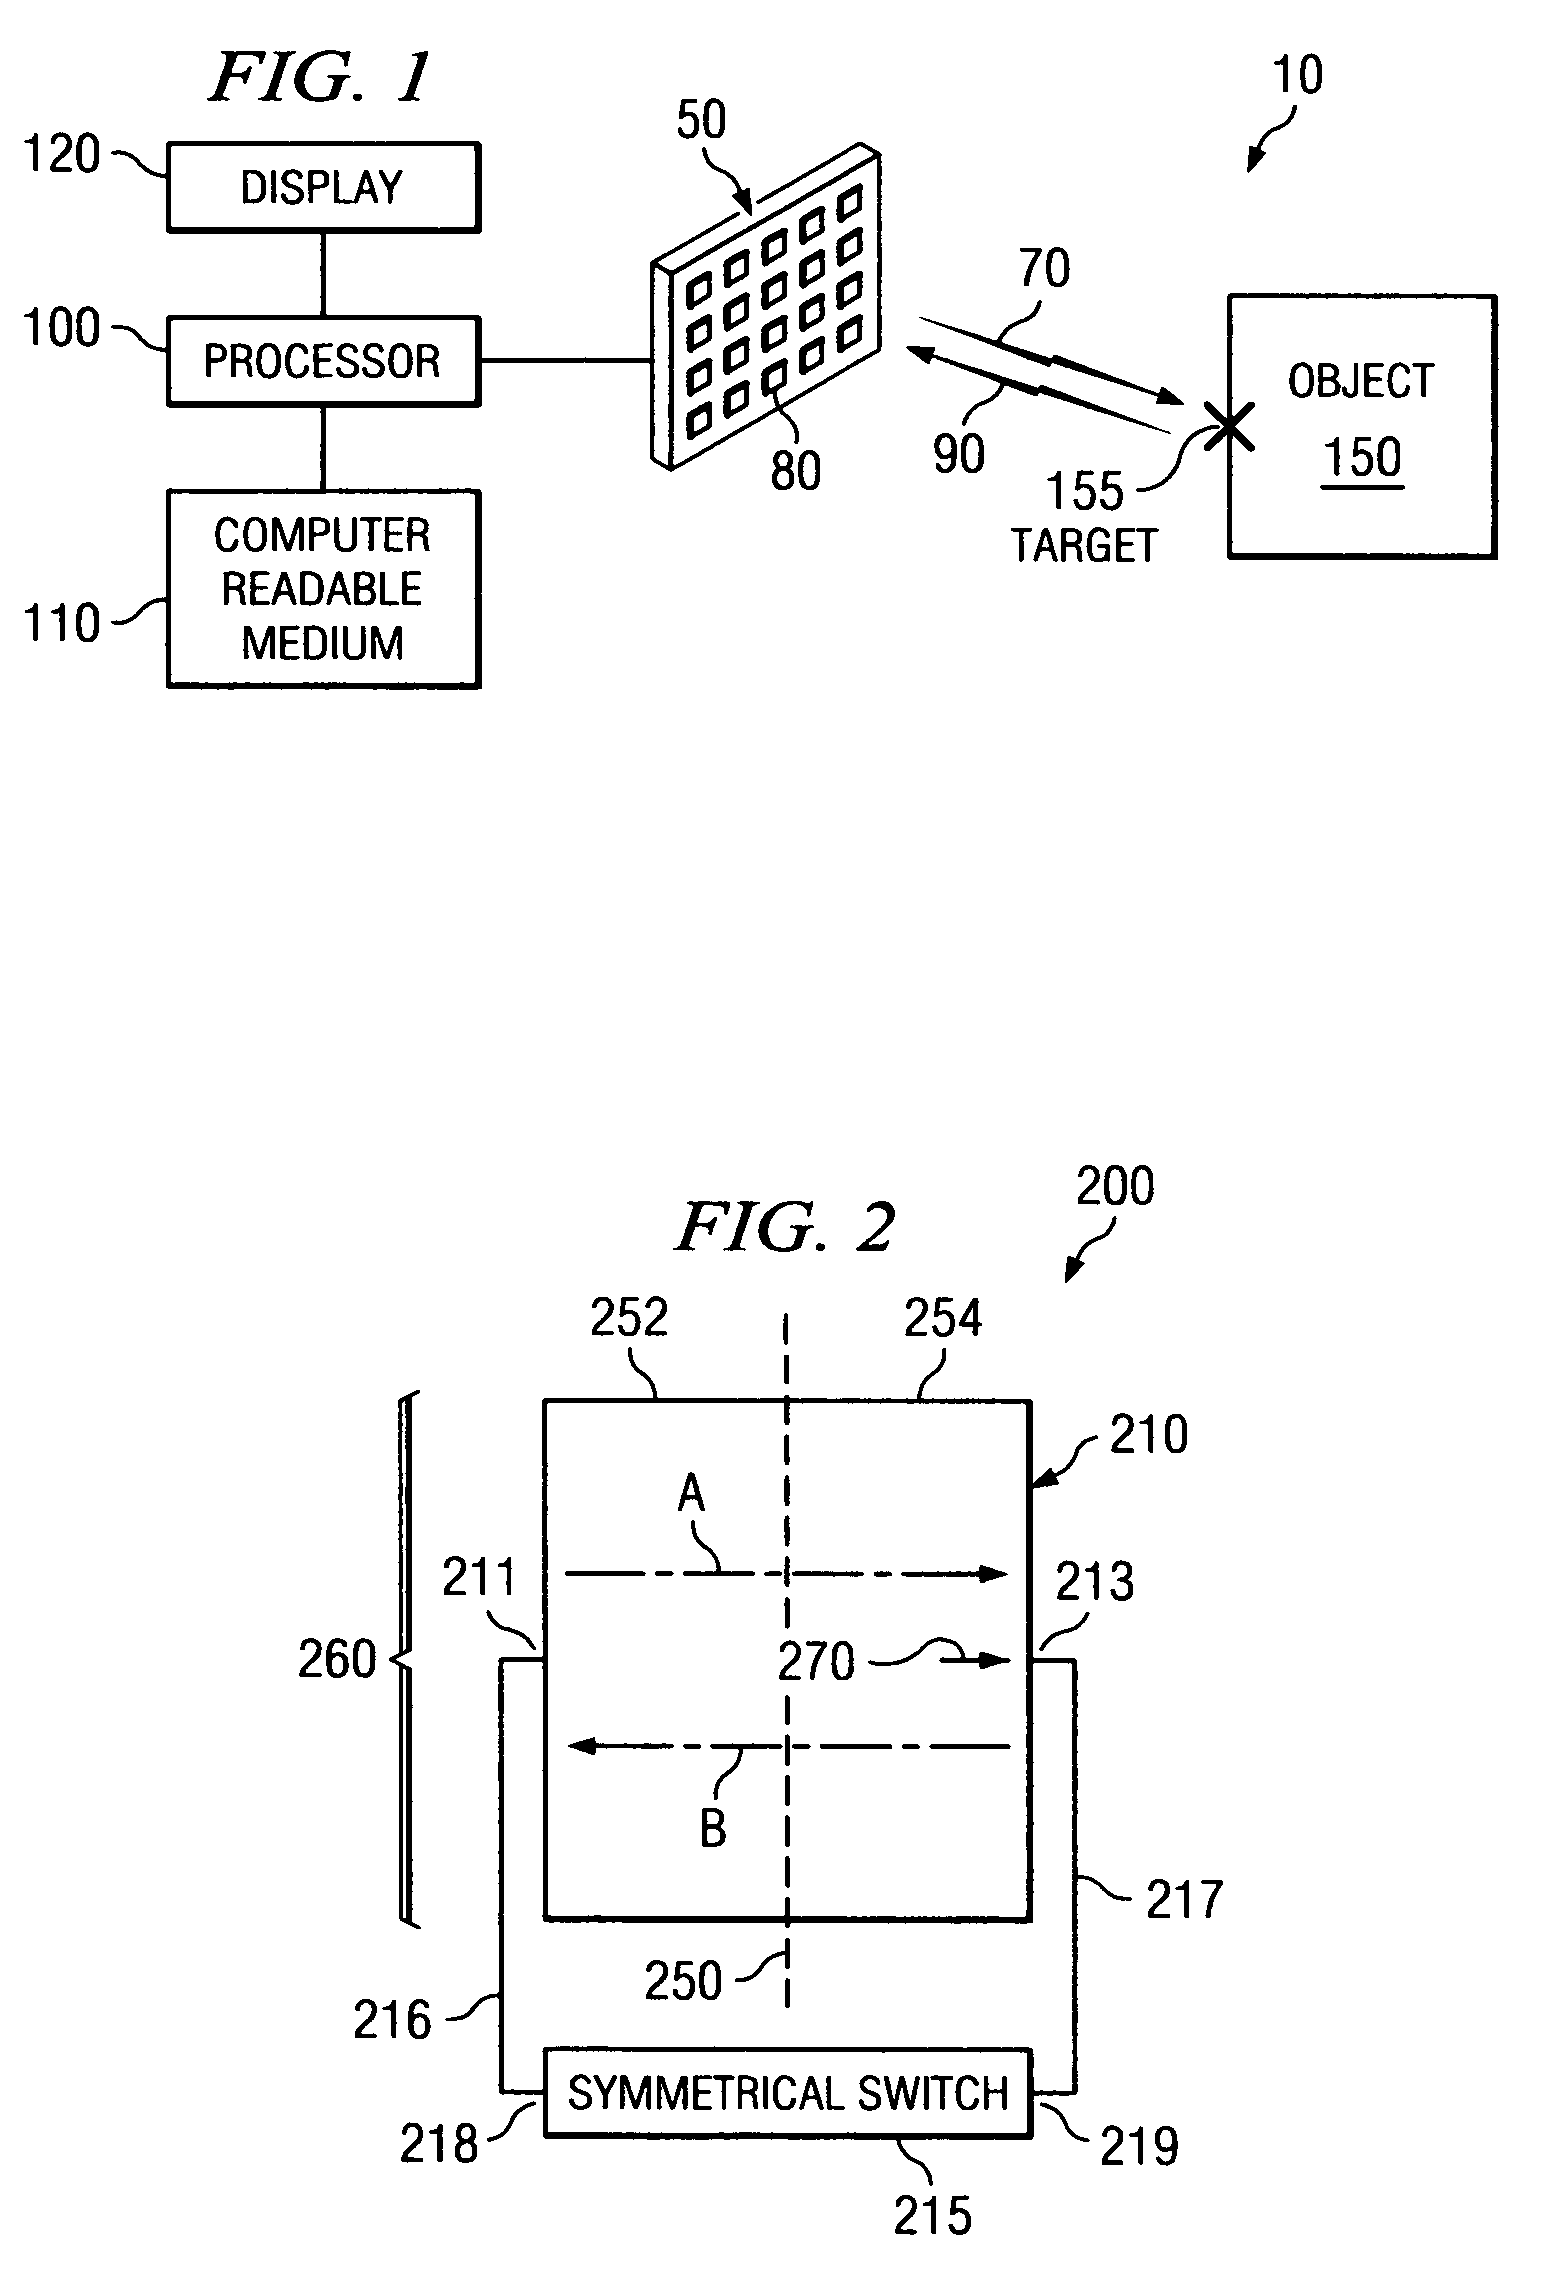 System and method for efficient, high-resolution microwave imaging using complementary transmit and receive beam patterns